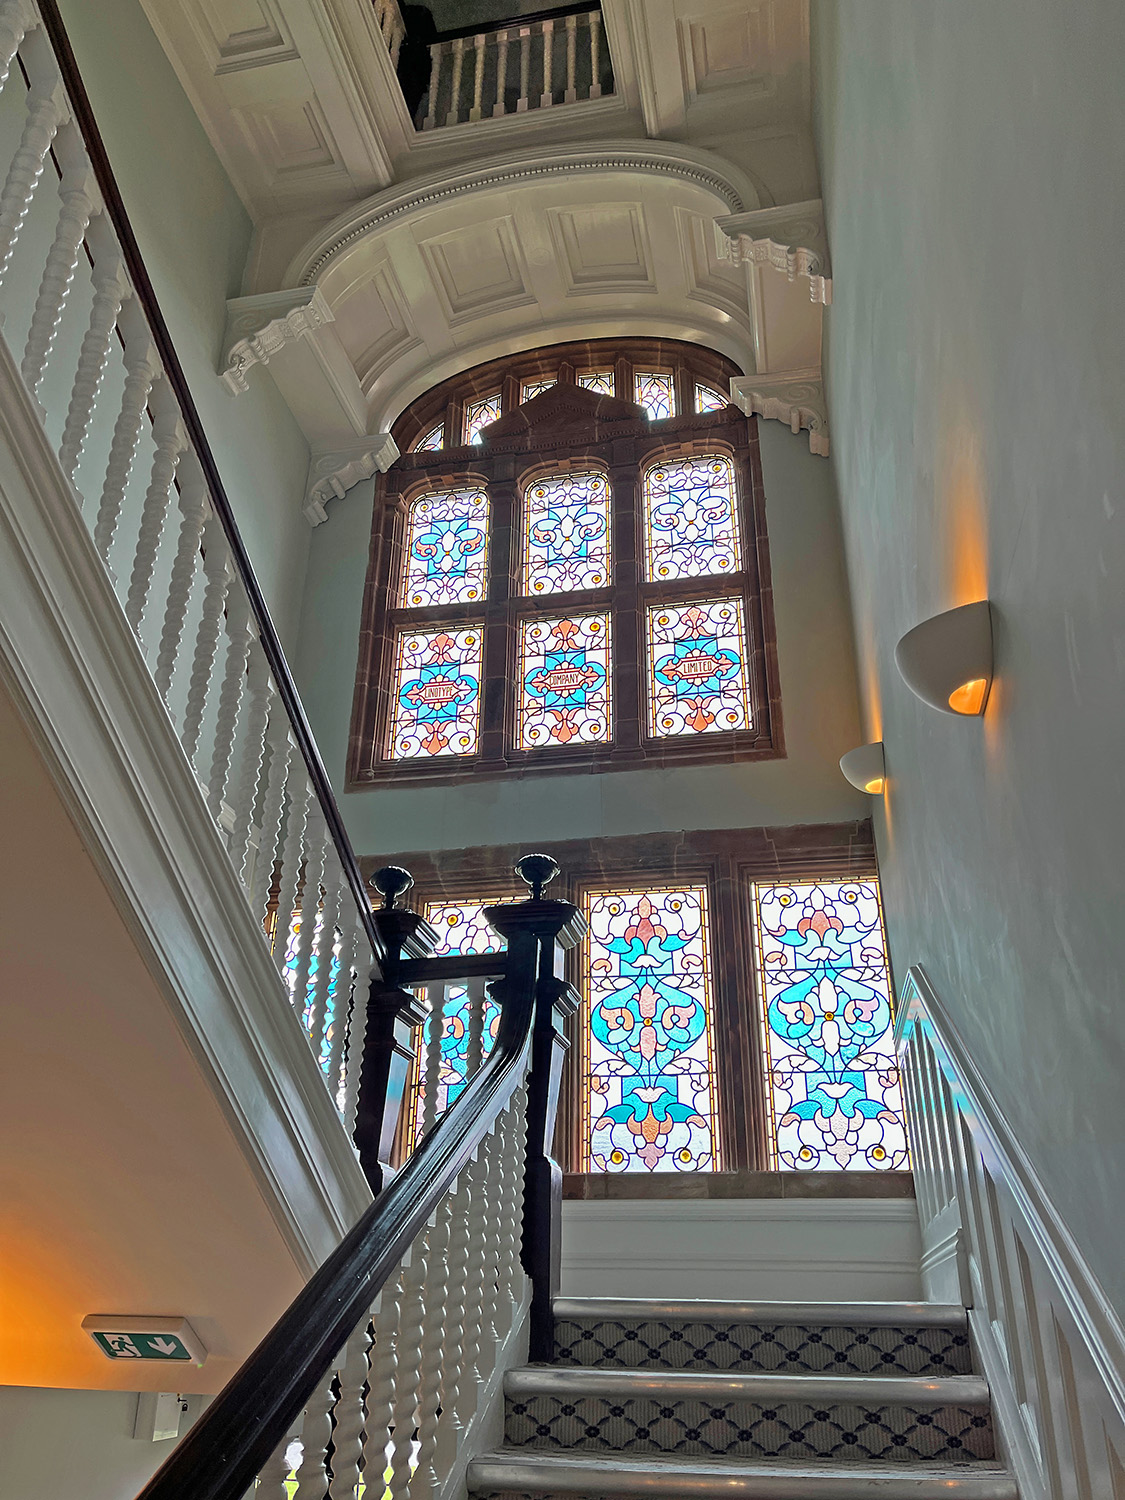 The central atrium with original staircase and beautiful wall of stained glass. What company today would build such an elaborate and ornate building?